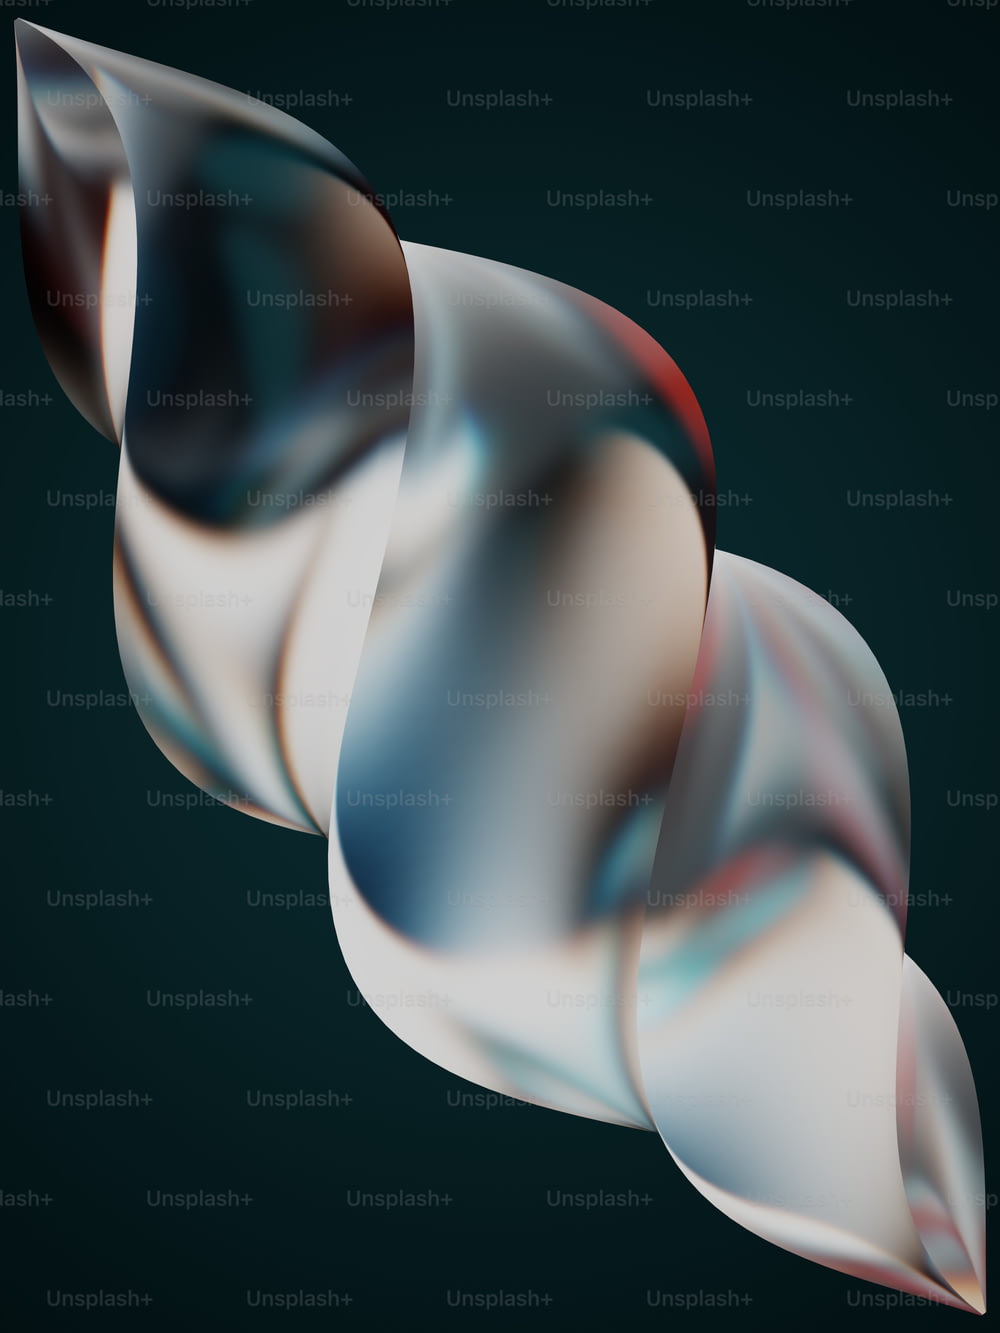 an abstract image of a curved object on a black background